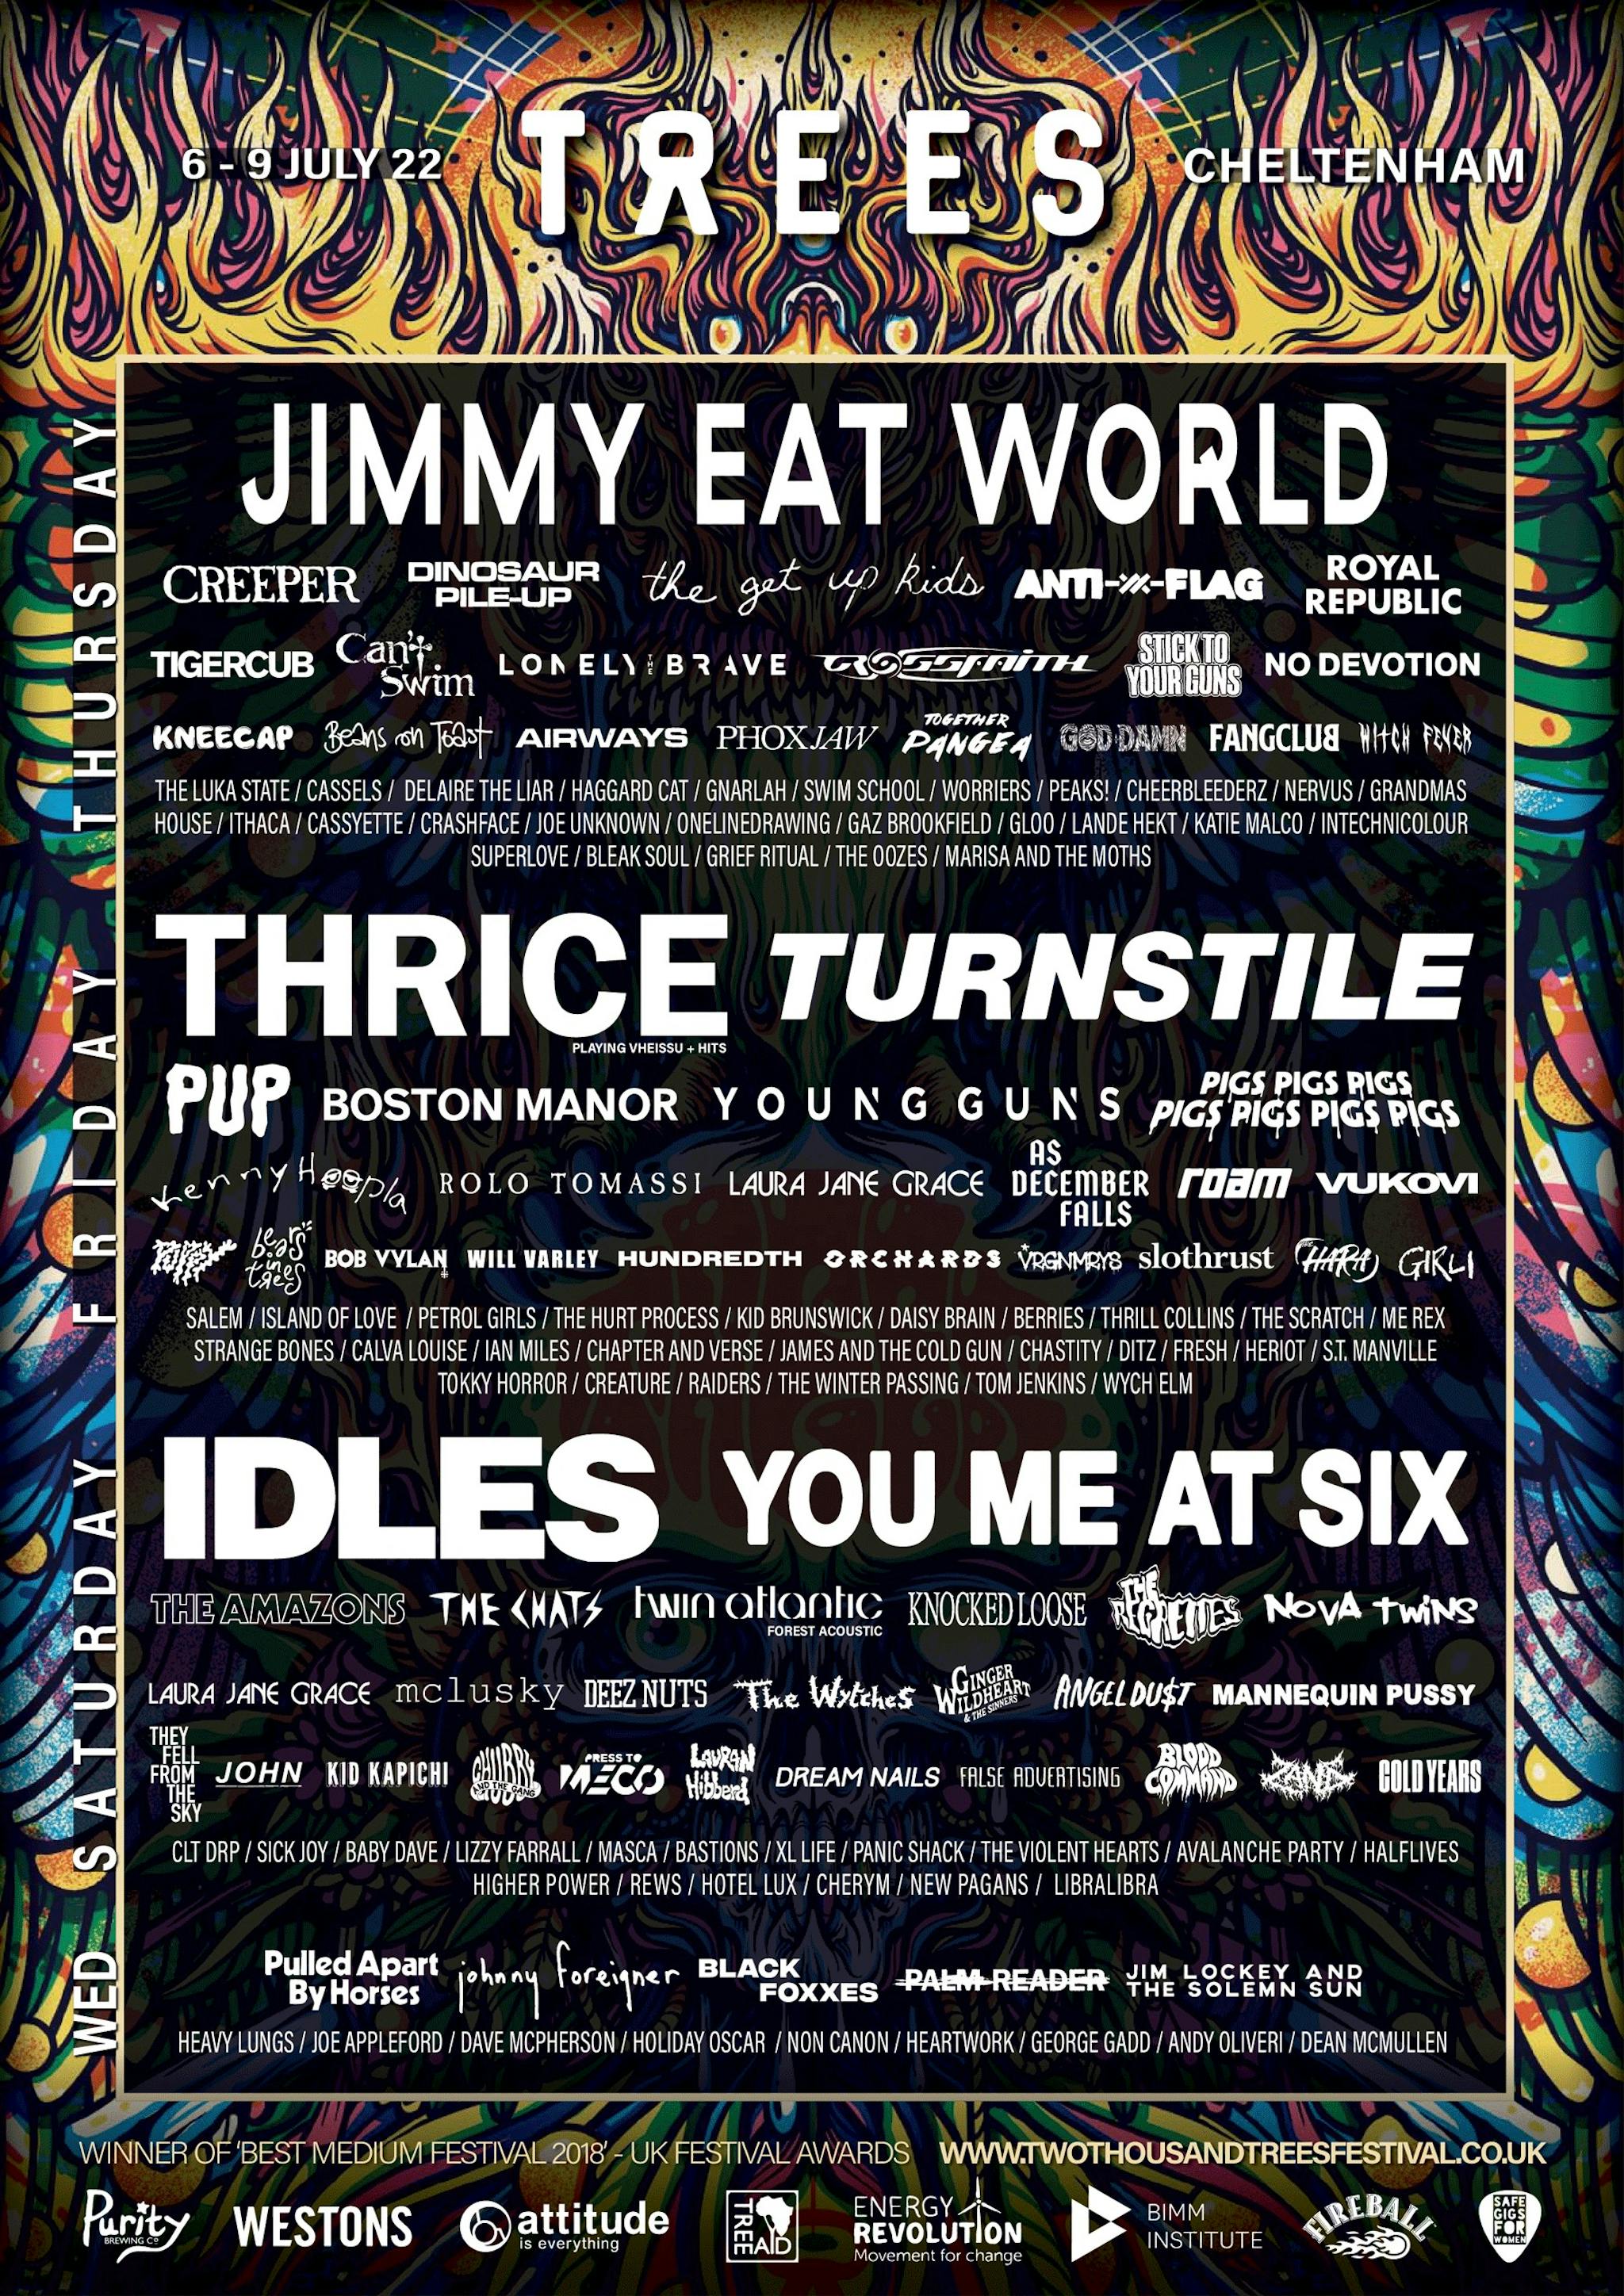 2000trees March 2022 updated poster